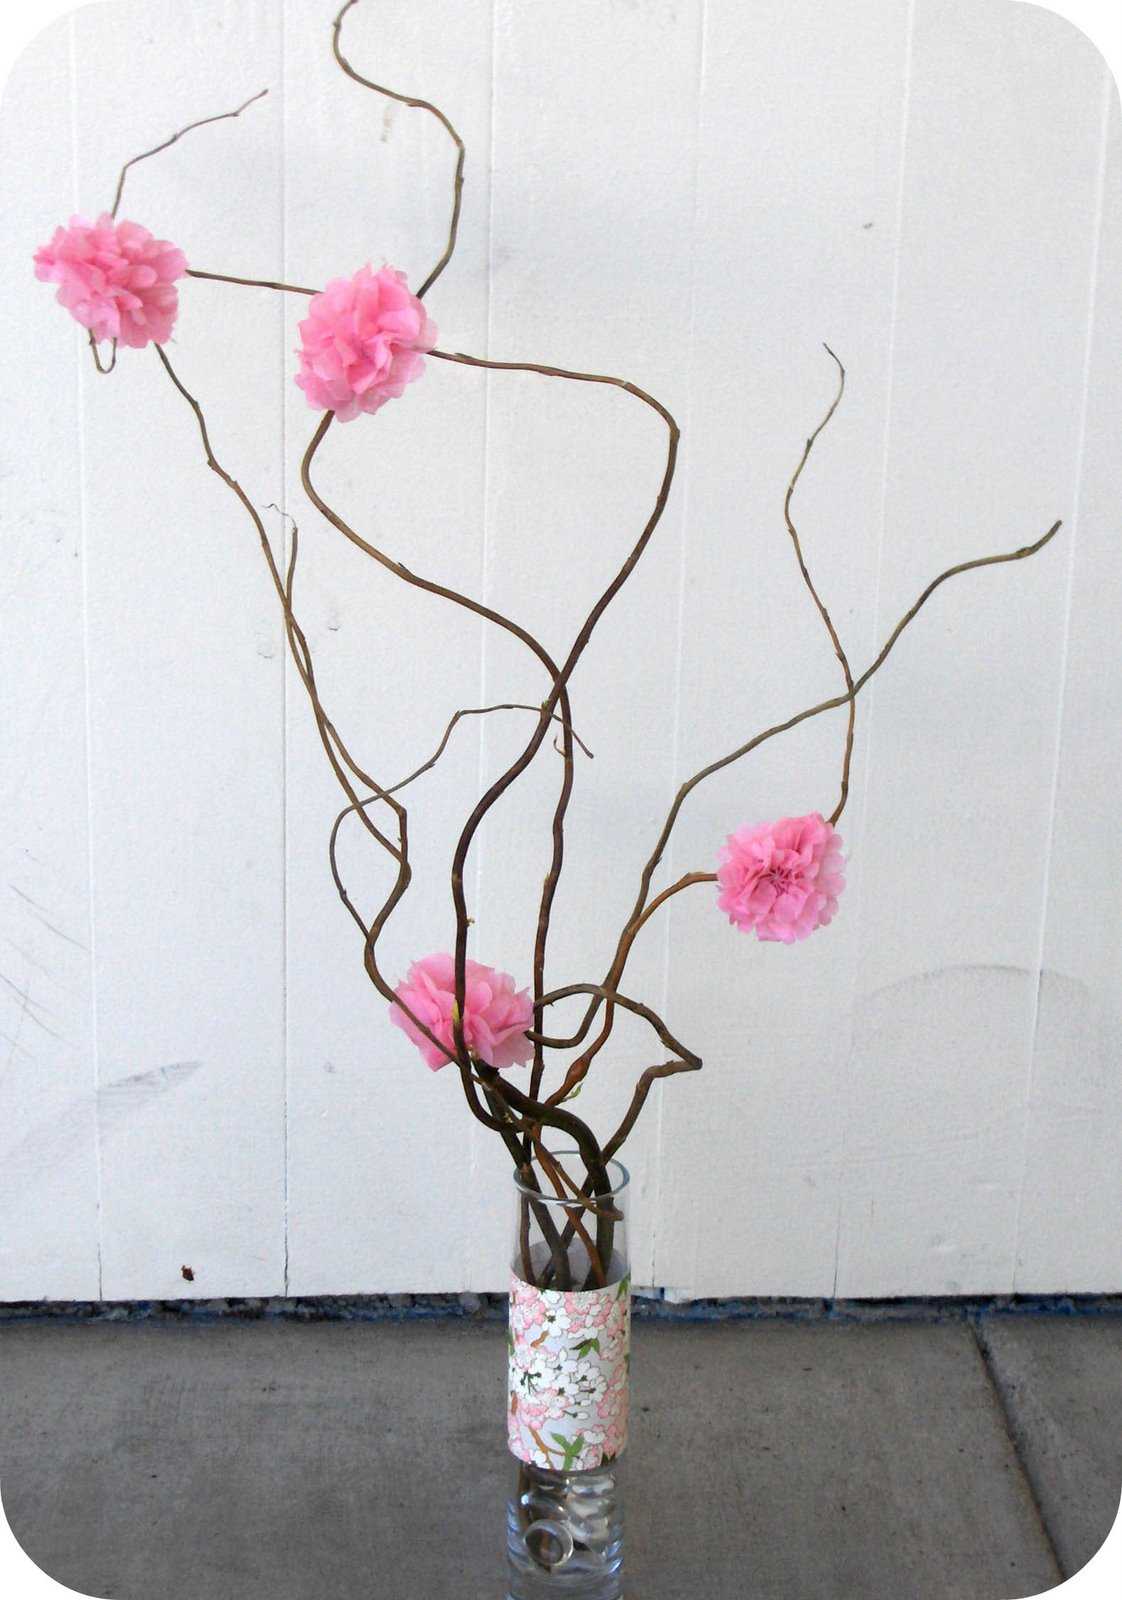 the idea of ​​the original design of a floor vase with decorative branches